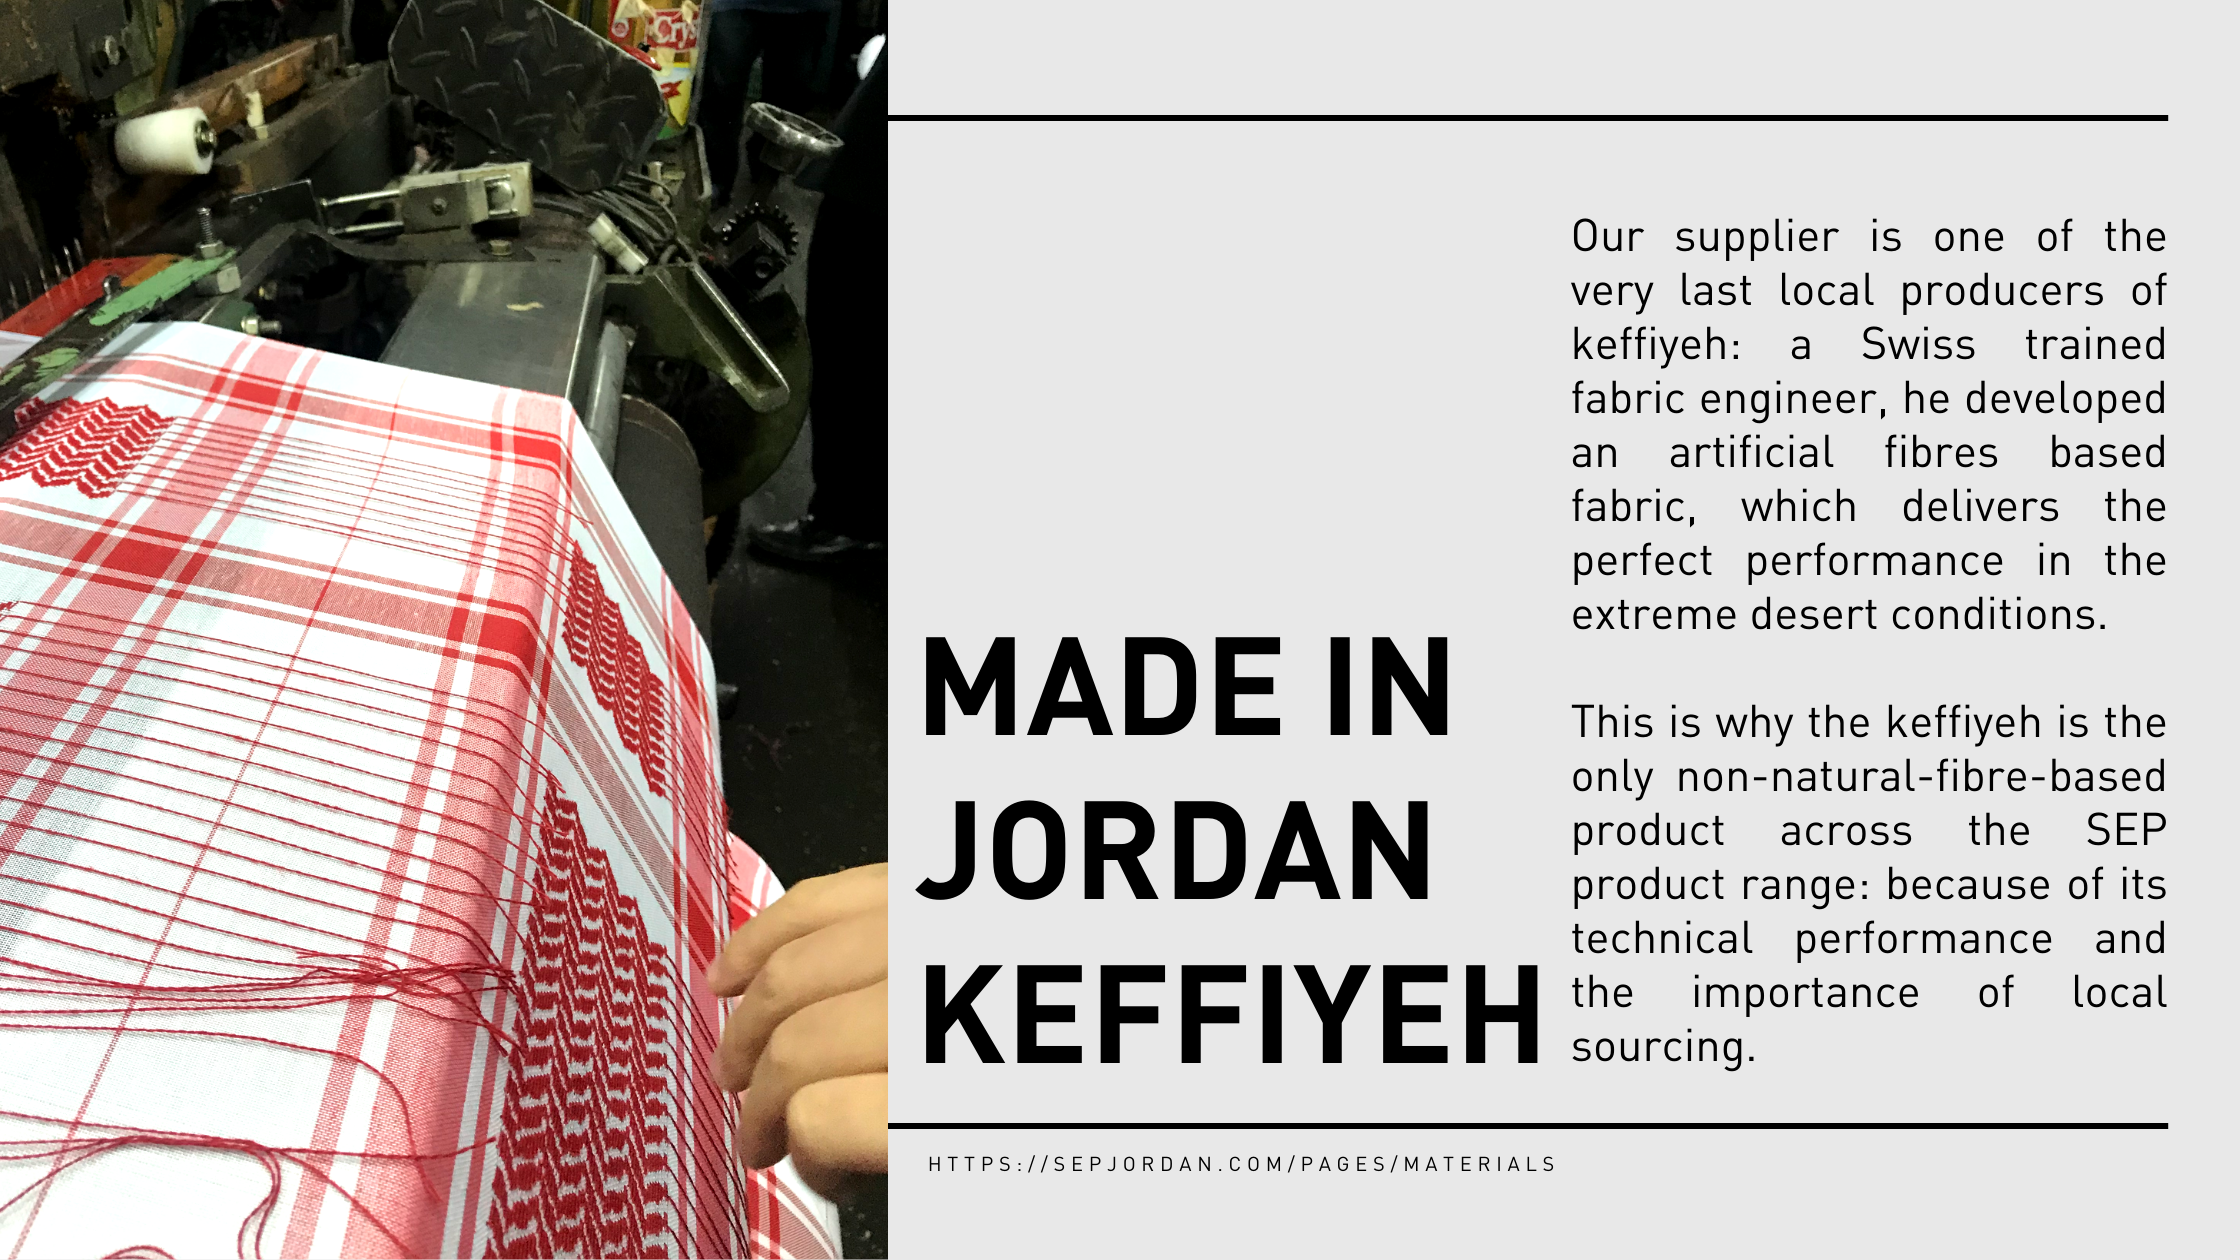 Our supplier is one of the very last local producers of keffiyeh: a Swiss trained fabric engineer, he developed an artificial fibres based fabric, which delivers the perfect performance in the extreme desert conditions.  This is why the keffiyeh is the only non-natural-fibre-based product across the SEP product range: because of its technical performance and the importance of local sourcing.